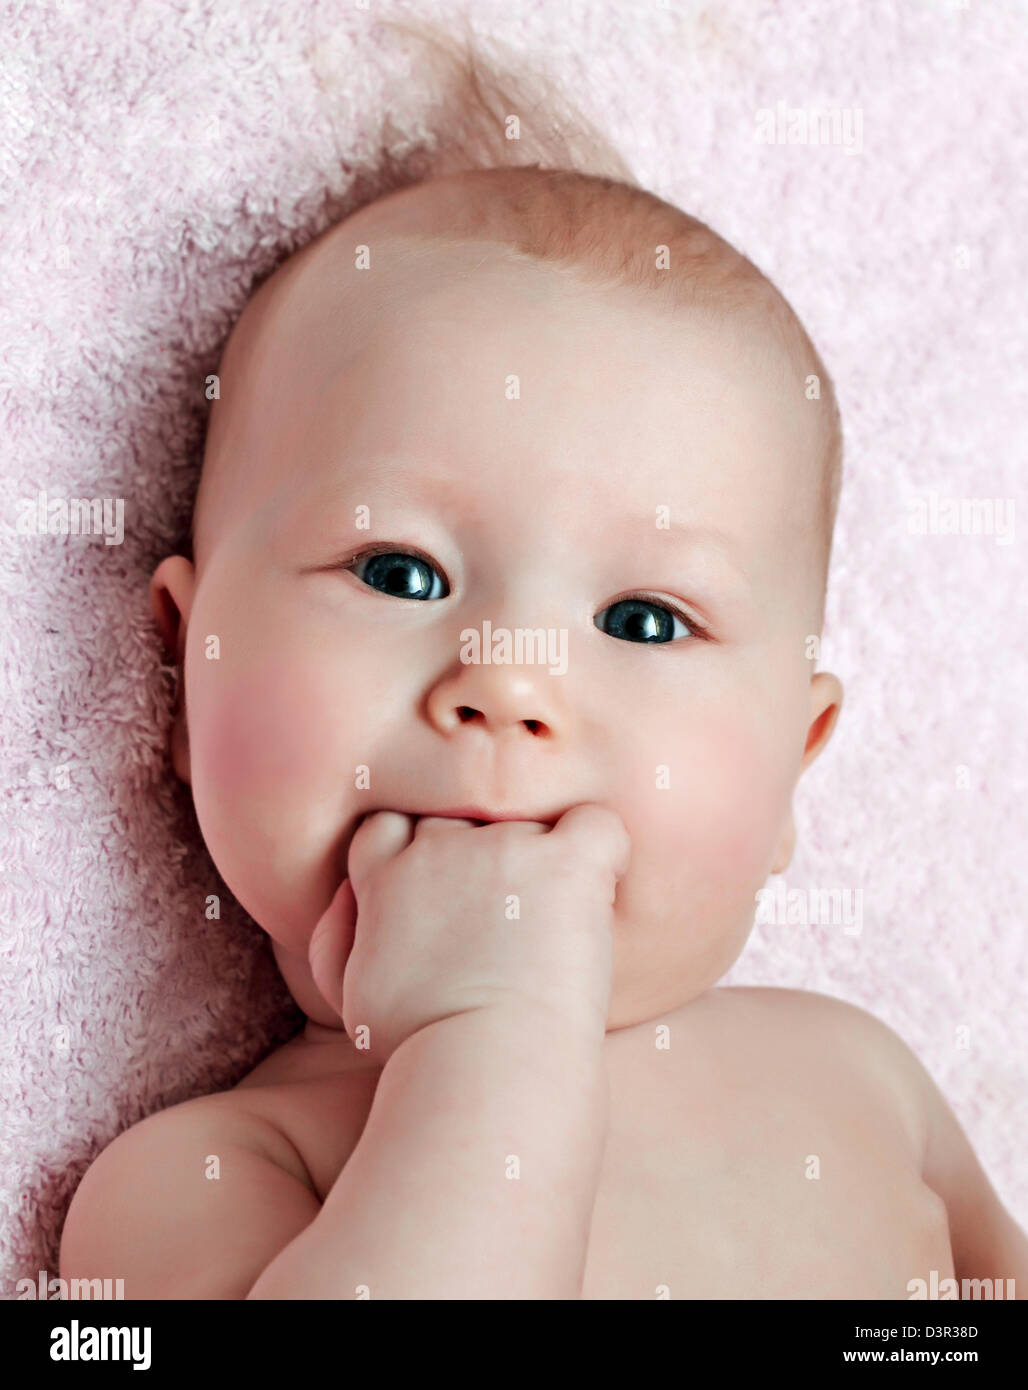 Newborn baby with fist in the mouth Stock Photo